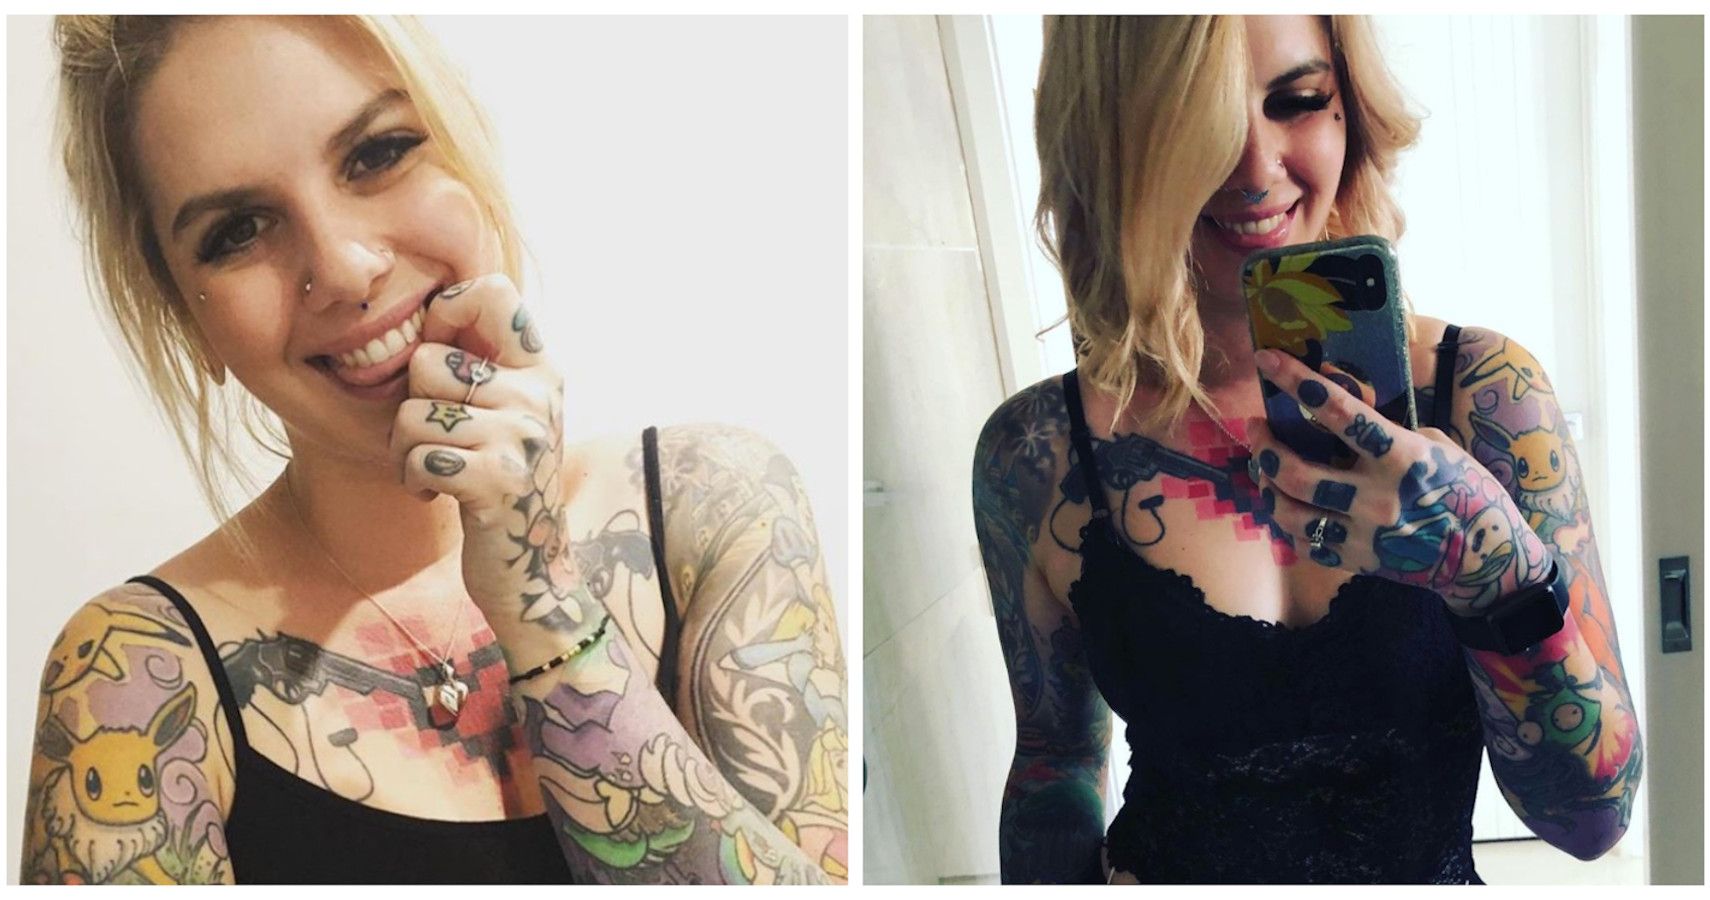 Woman Covered In Pokemon Tattoos Denied Position On Police Force